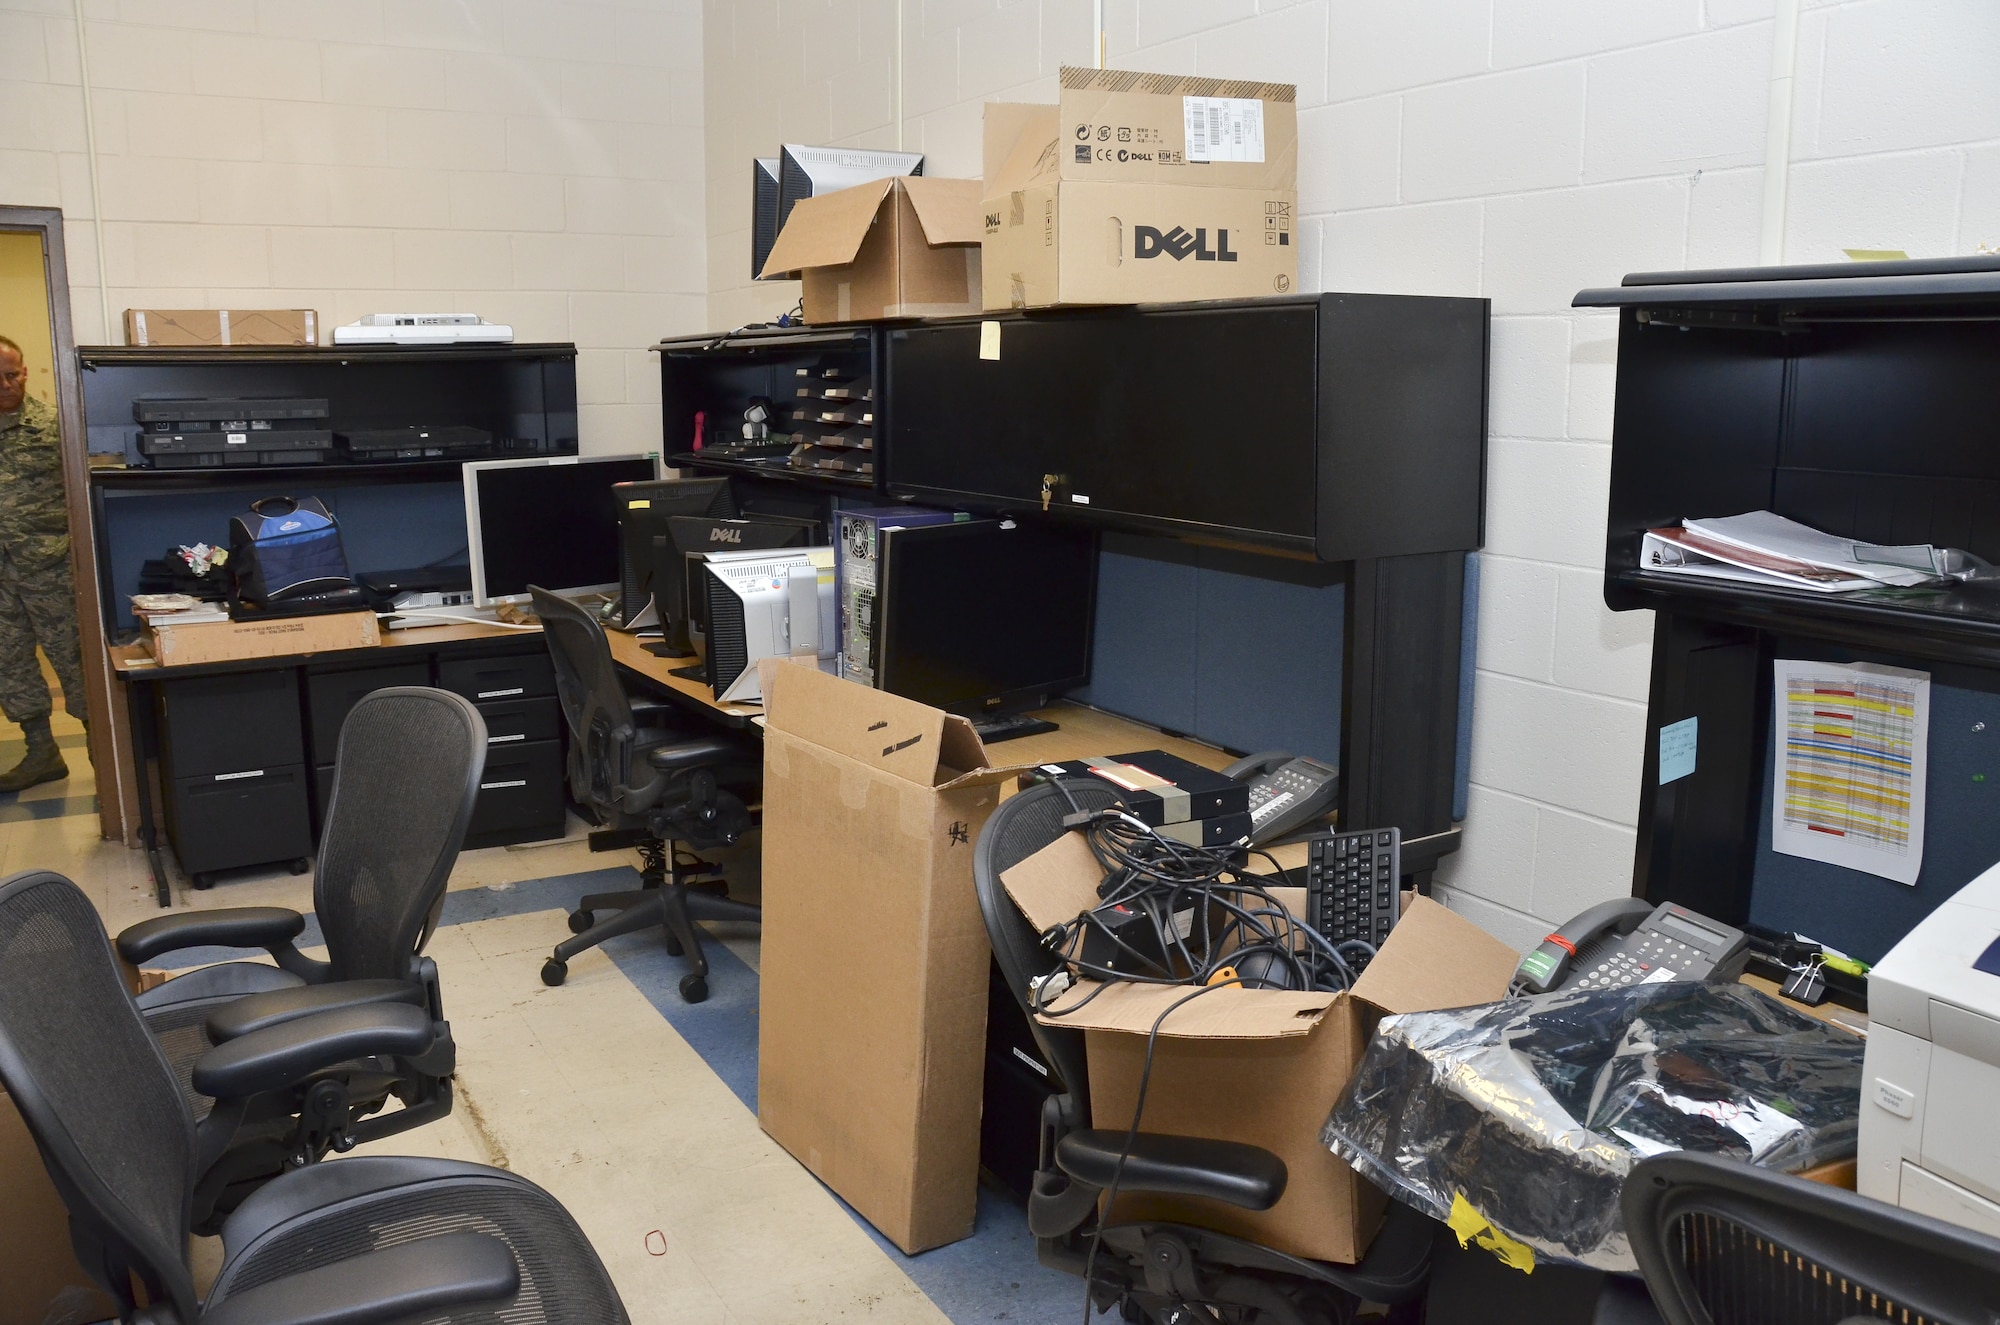 The Intelligence Squadron at the 117th Air Refueling Wing chose this IT storage room as part of a plan to clean up, organize much needed space, and work more efficiently. (U.S. Air National Guard photo by: Senior Master Sgt. Ken Johnson/Released)